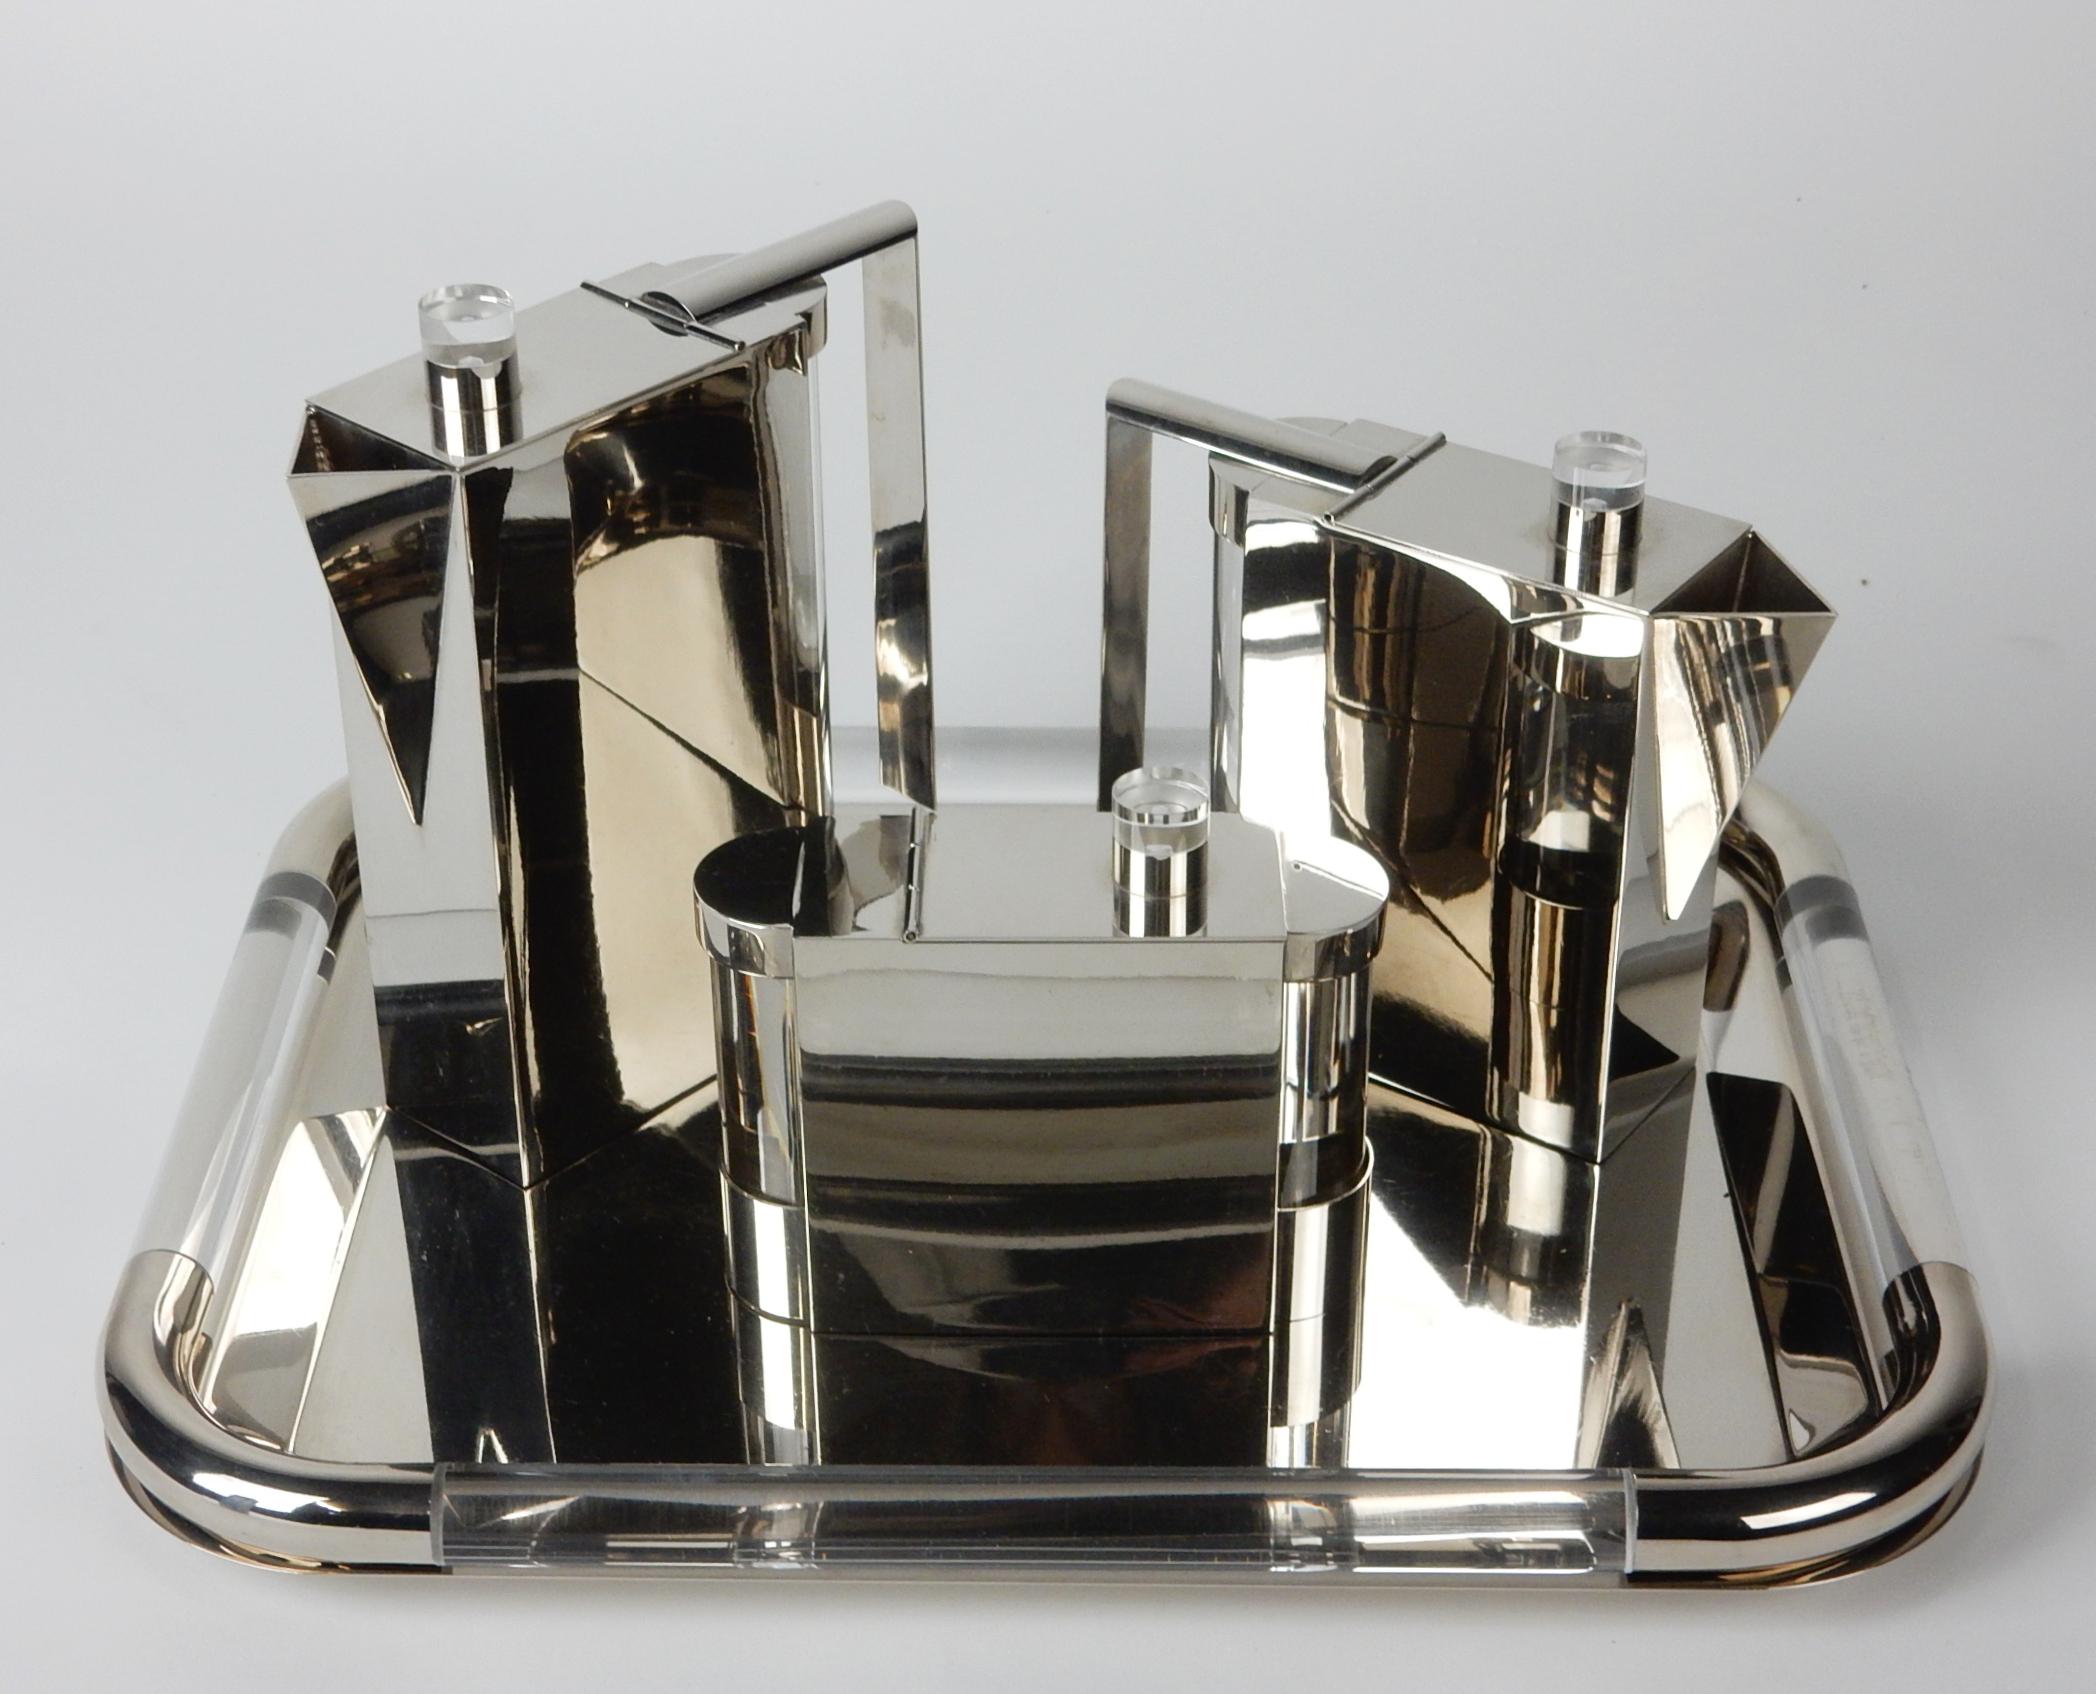 High quality tea service set designed by Punto Bacola for Montagnani of Florence, Italy, circa 1980. 
Formed of sculptural polished nickel with Lucite side/end caps and finials. 
Marked with gold label 